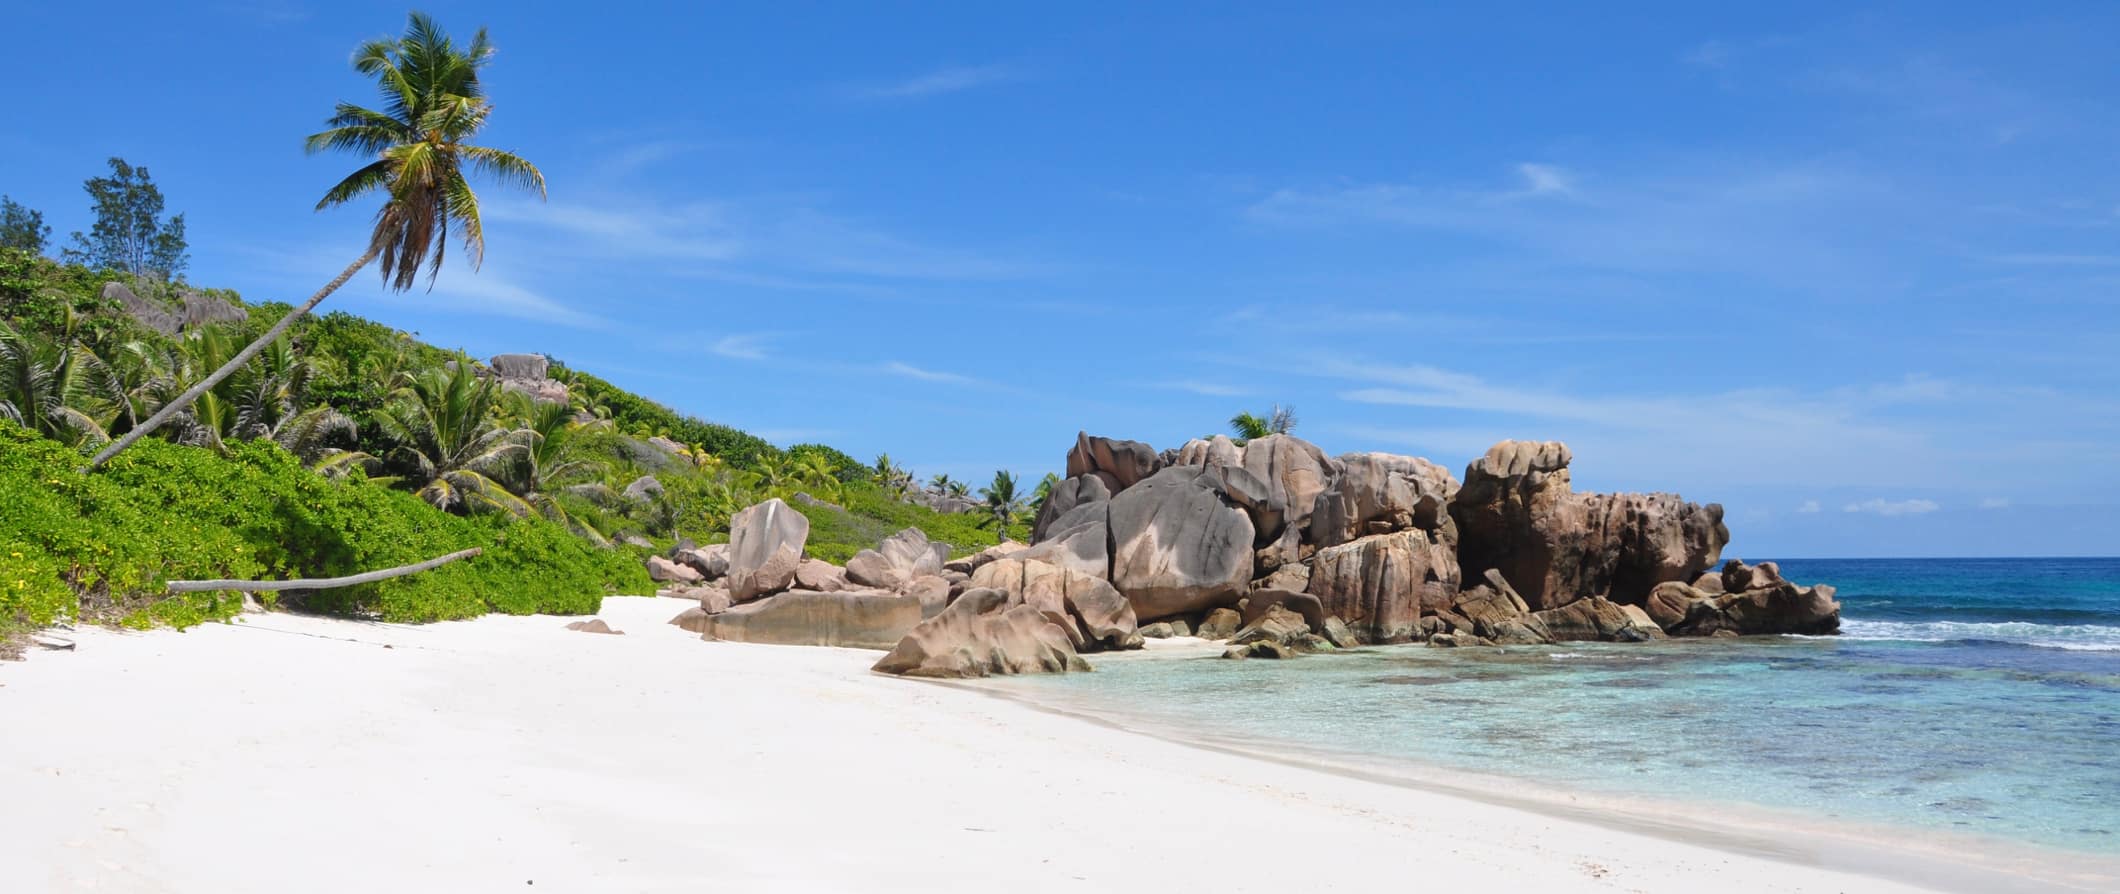 Safety Guide: Is Seychelles Safe?